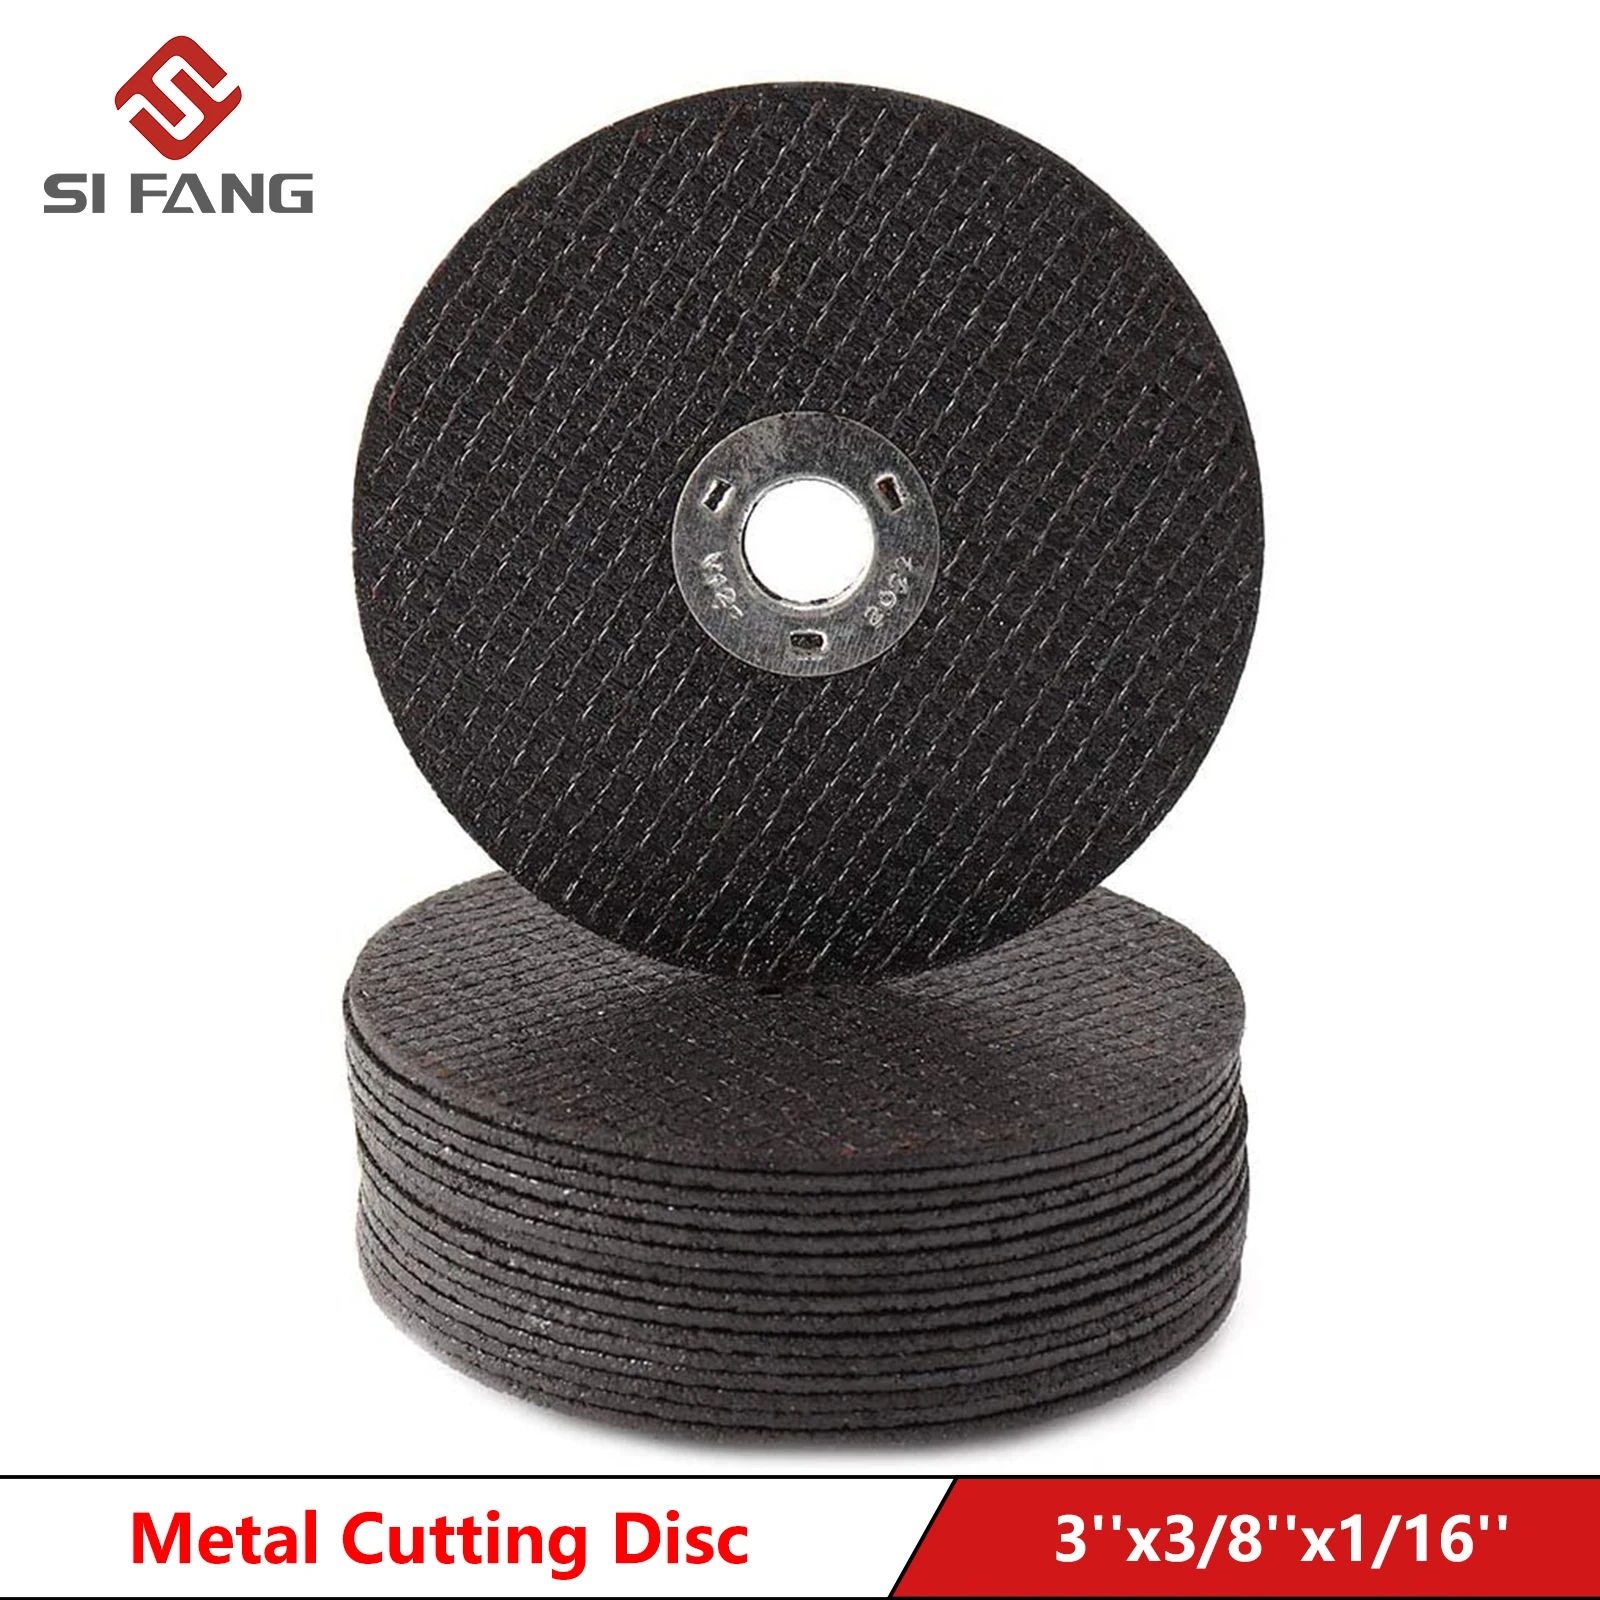 3'' 75mm Mini Cutting Disc Circular Resin Grinding Wheel For Angle Grinder Polishing Cutting Disc Electic Cutting Sheet 75mm grinding wheel metal cutting disc polishing sheet wool buffing wheels for power angle grinder accessories